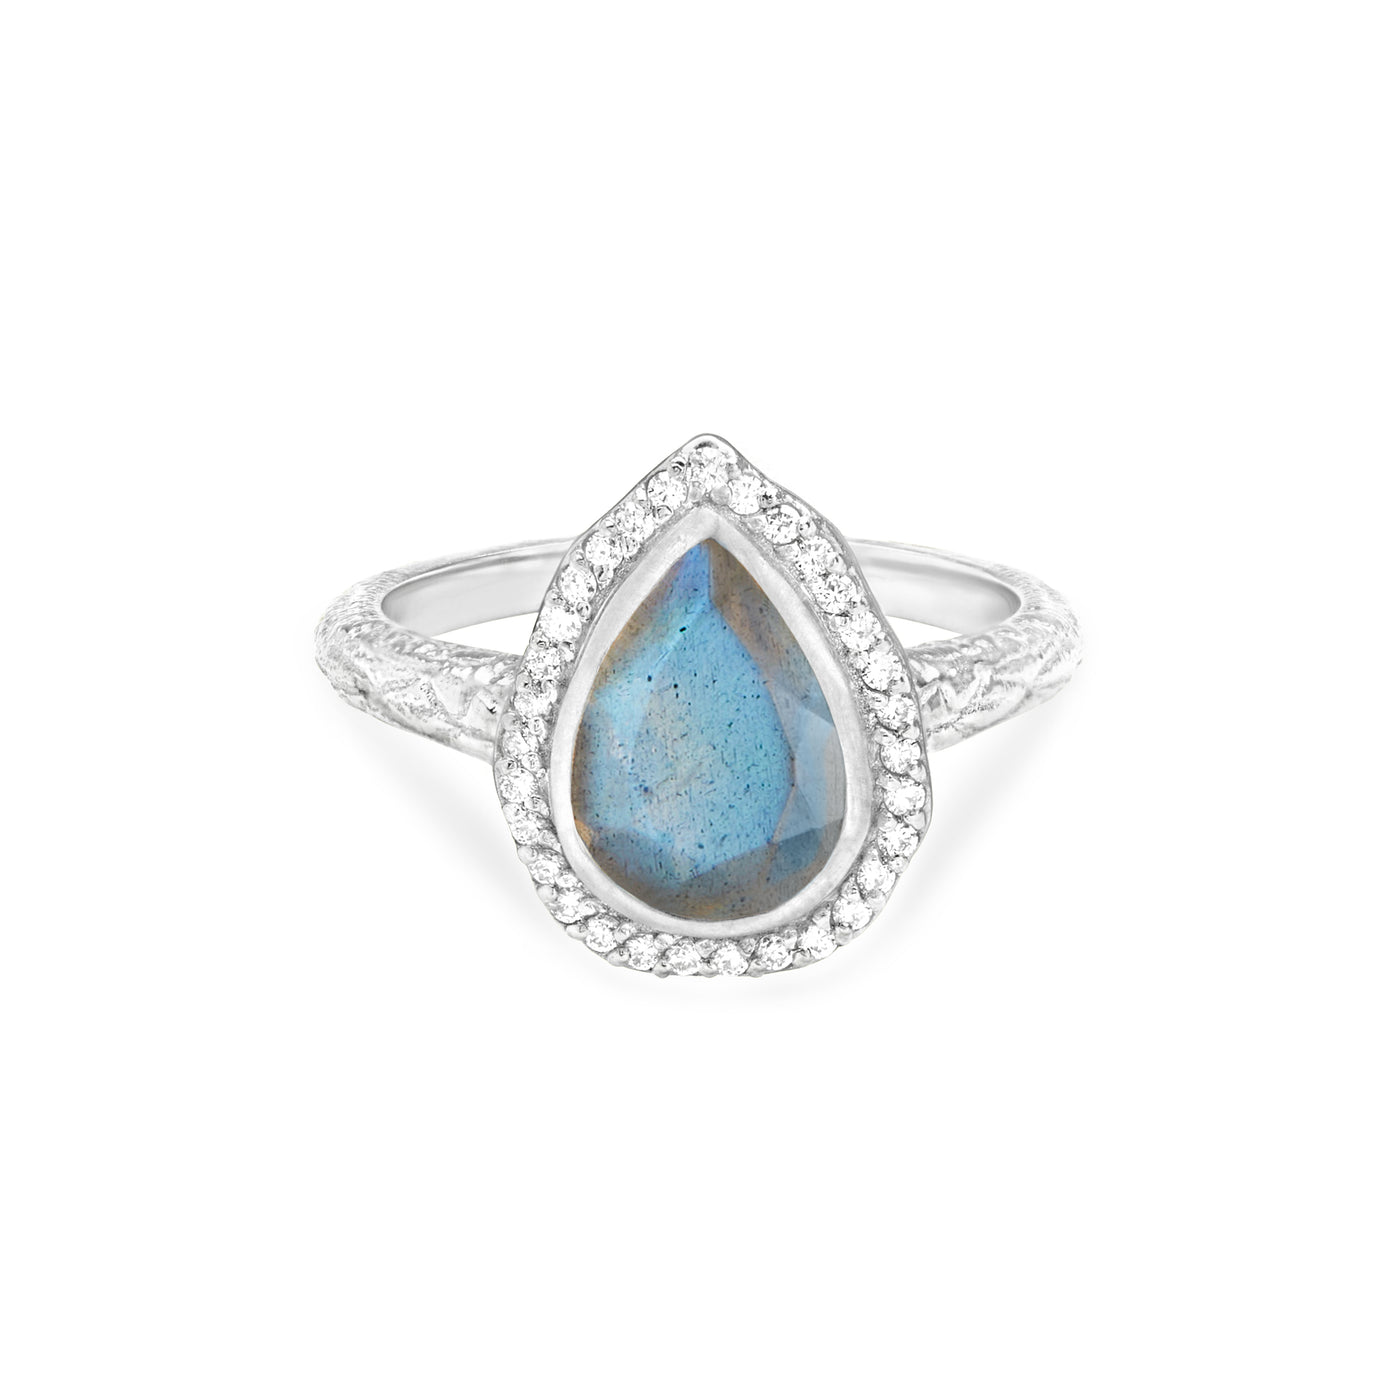 14 Karat White Gold Ring with Pear Shaped Labradorite Stone with Halo of White Diamonds Against White Background